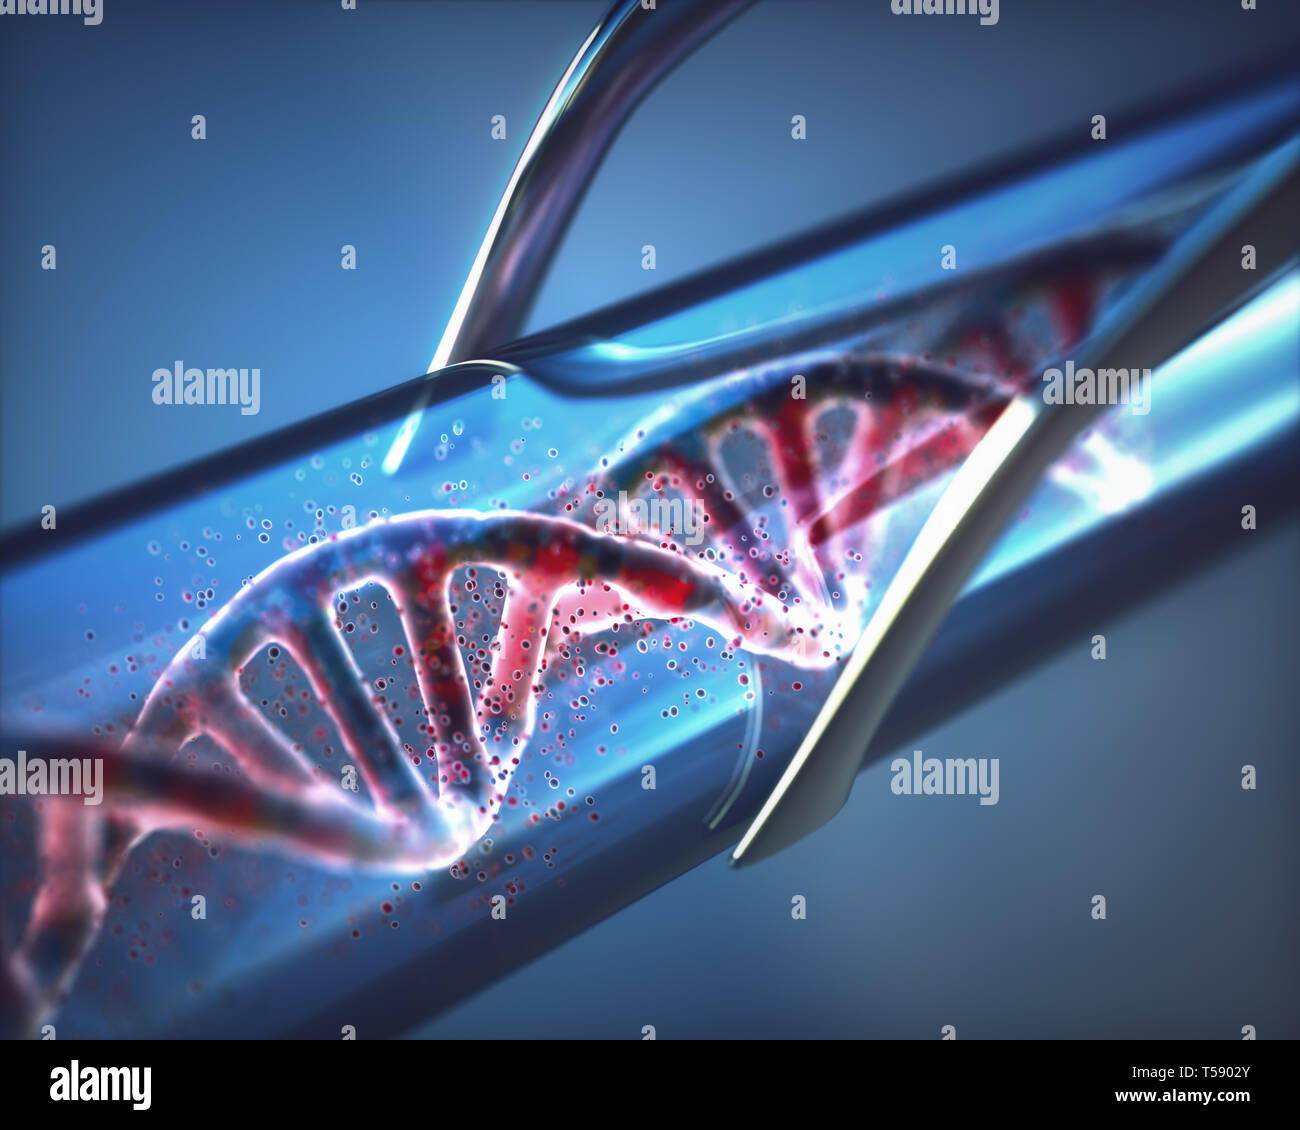 3D illustration. Creation of artificial DNA inside a test tube. Stock Photo